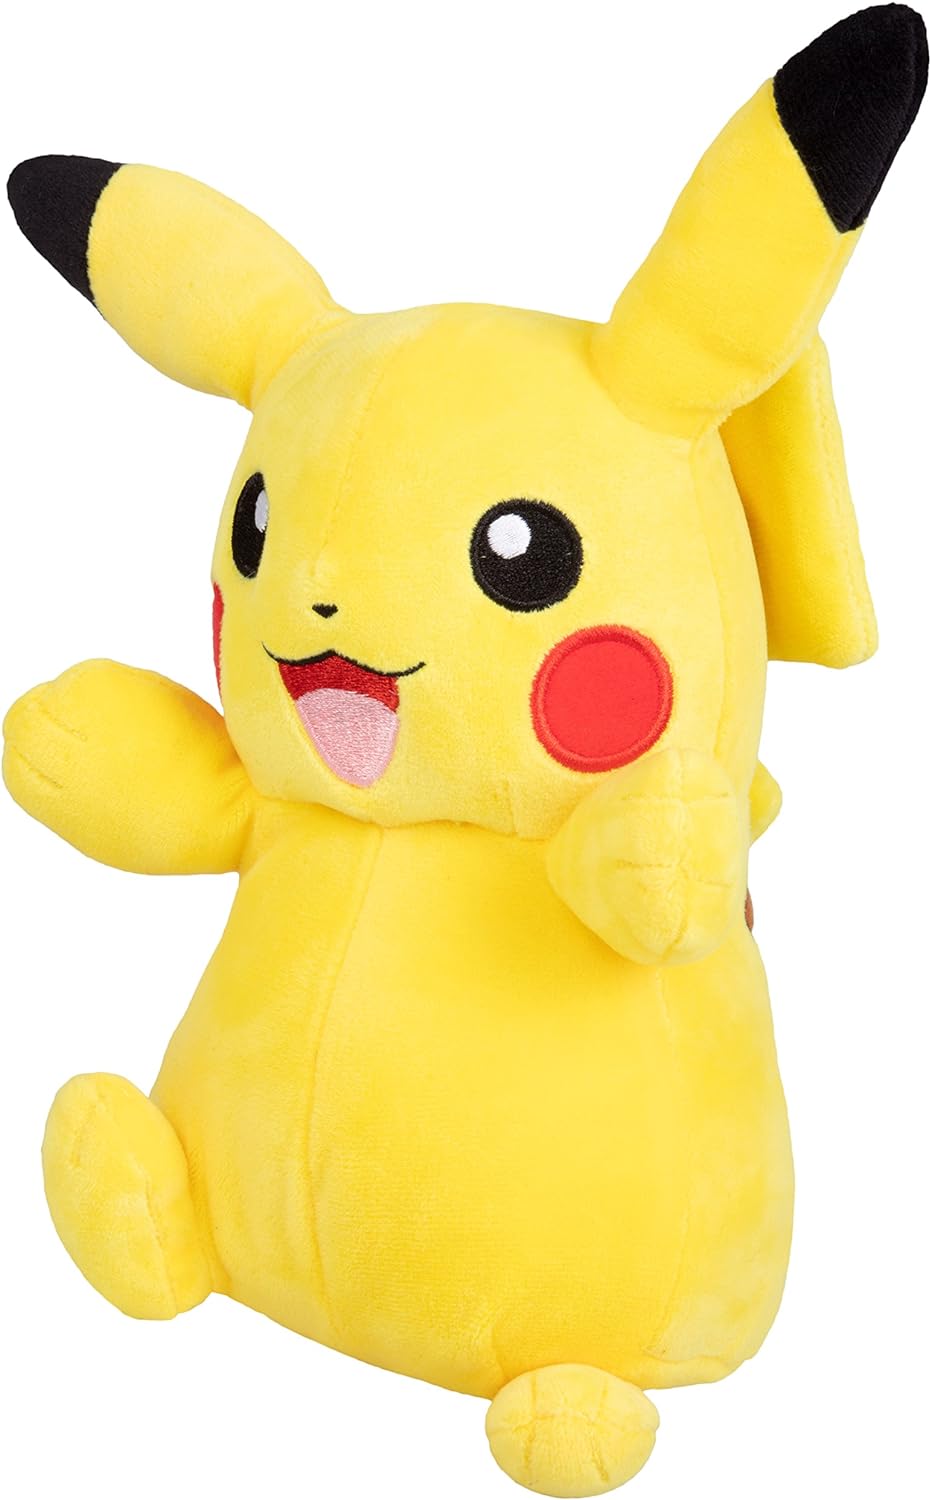 Pokémon 8" Pikachu Plush - Officially Licensed - Quality & Soft Stuffed Animal Toy - Generation One - Great Gift for Kids, Boys, Girls & Fans of Pokemon - 8 Inches